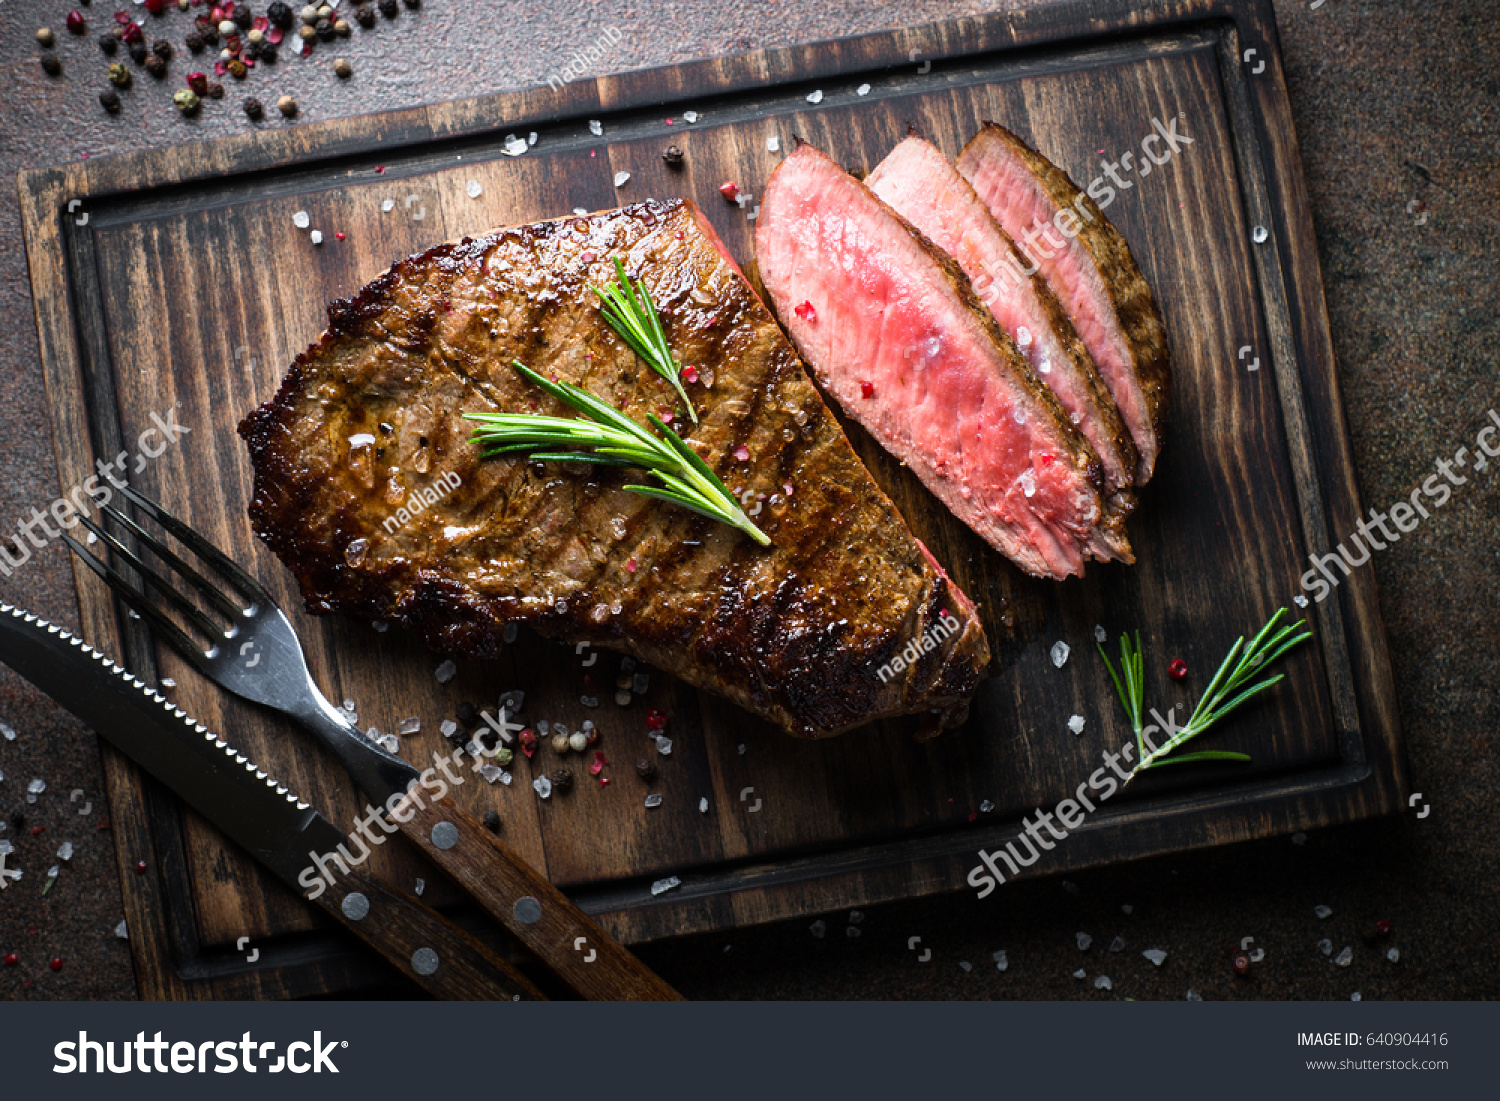 Fresh grilled meat. Grilled beef steak medium rare on wooden cutting board. Top view. #640904416